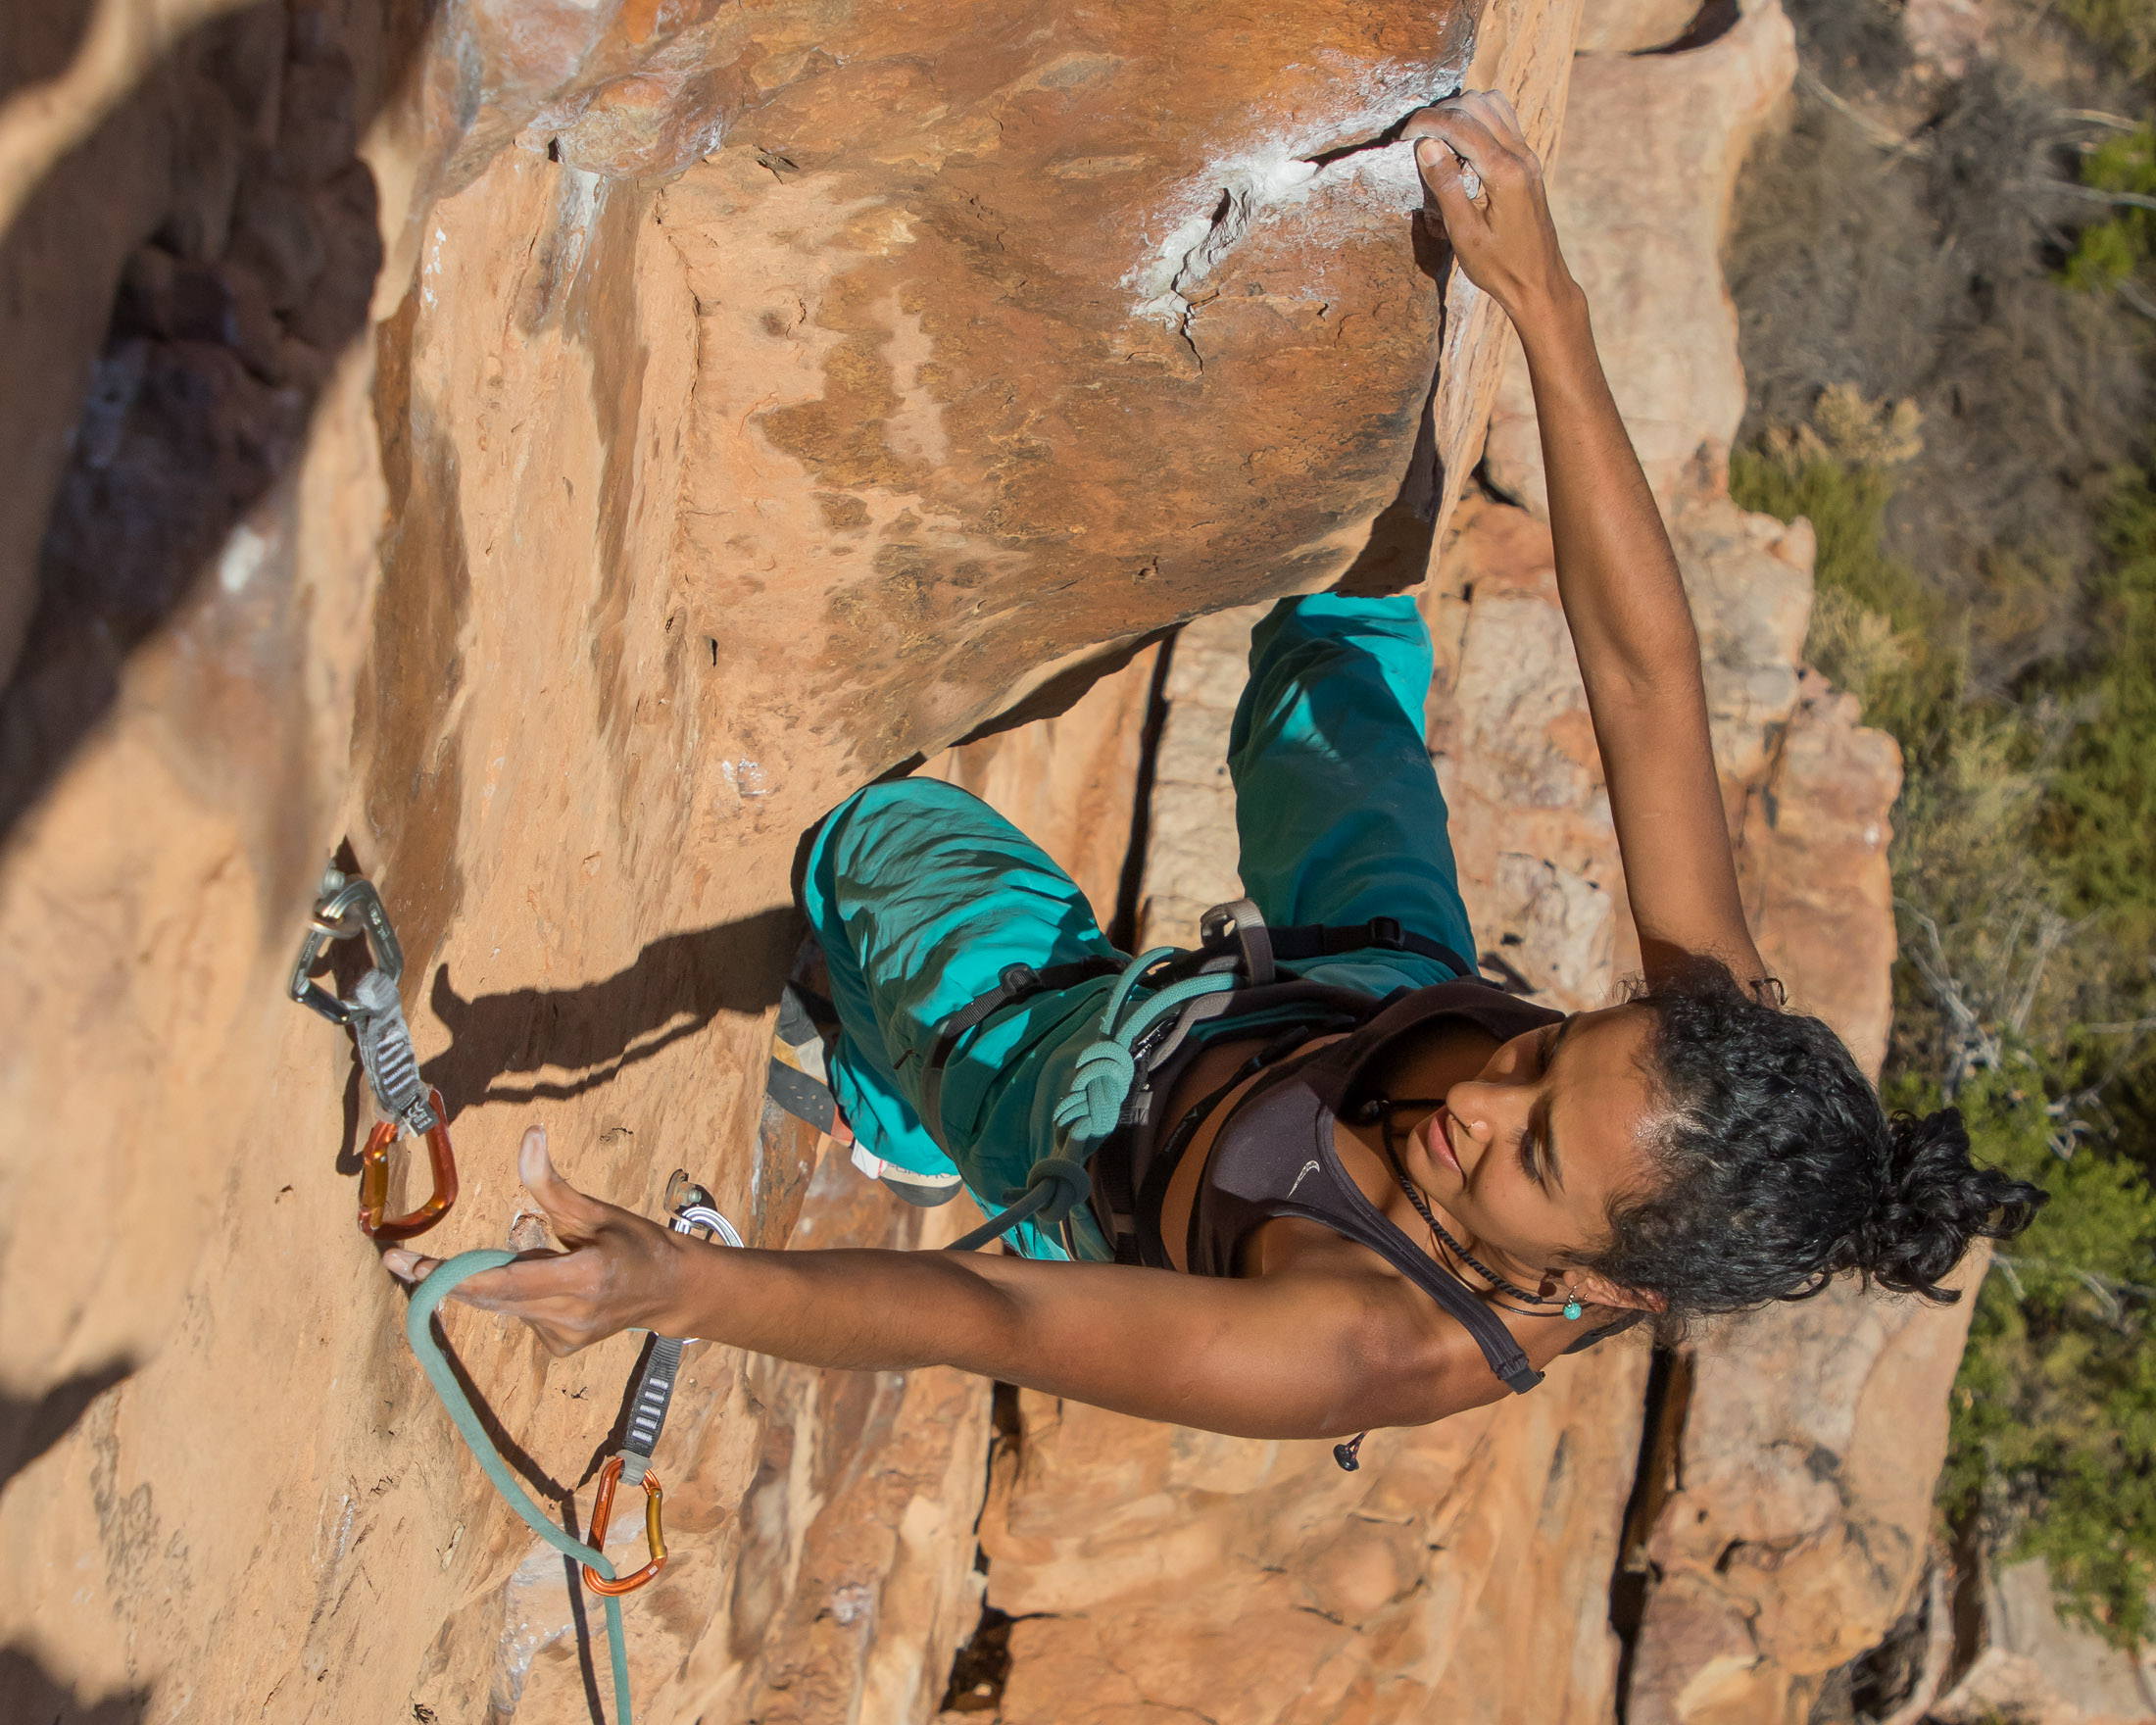 Climber redpointing a hard route with thin rope